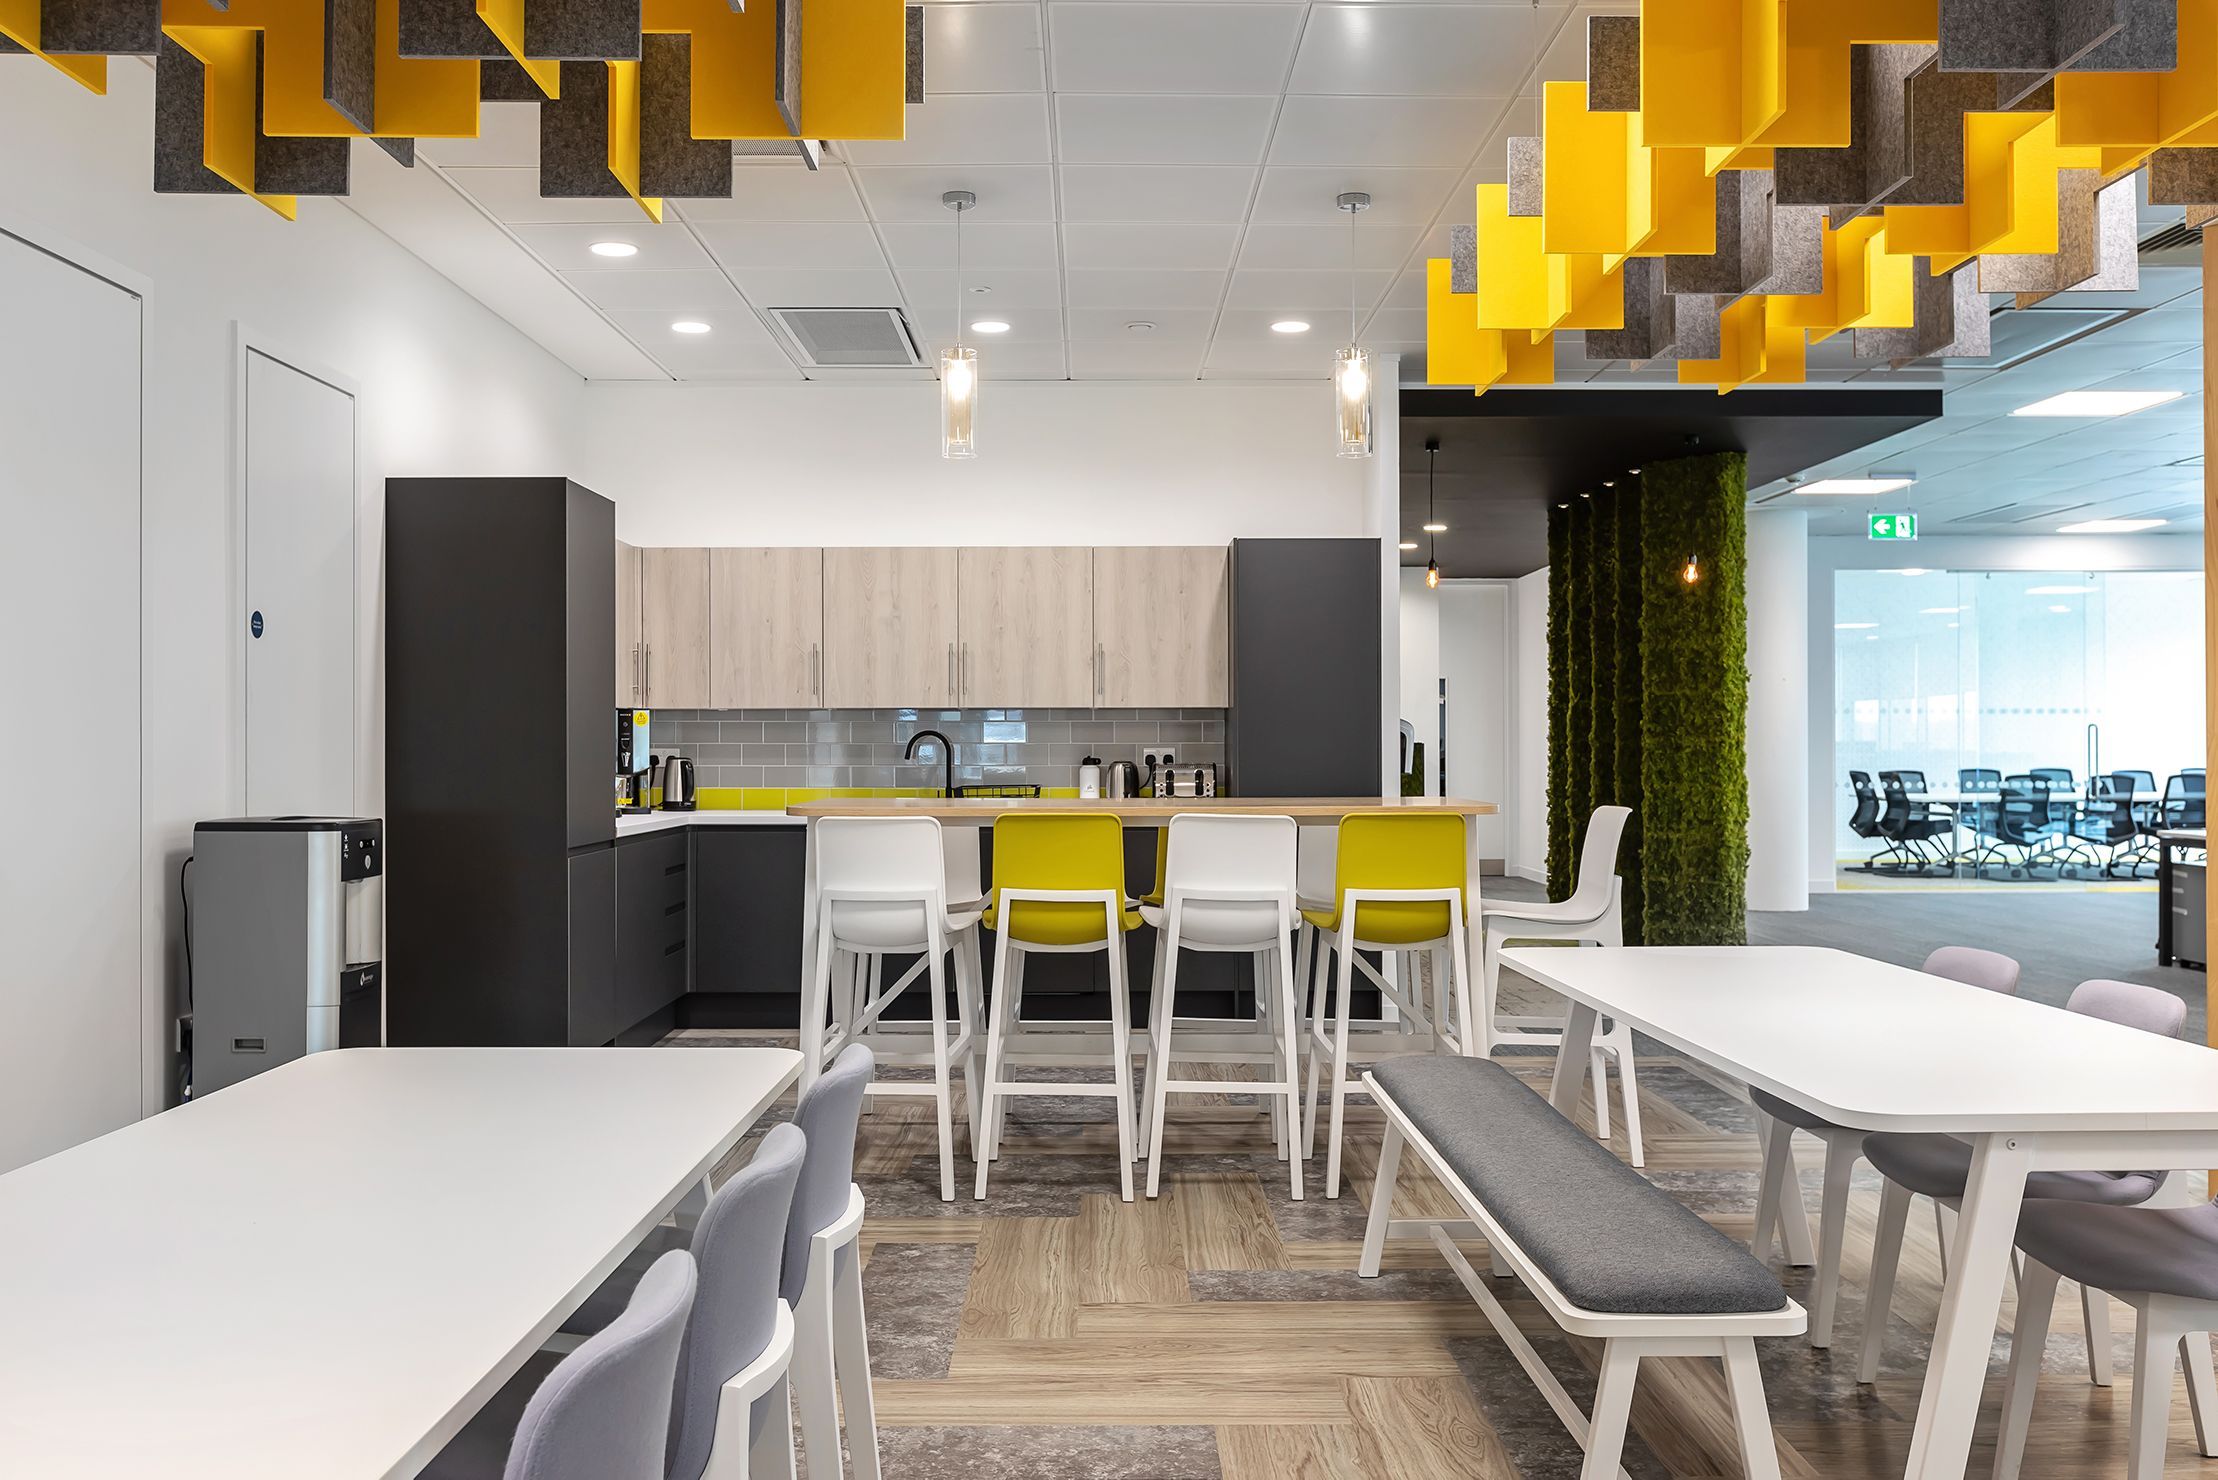 A colourful office kitchen with dark grey counters and white countertops.